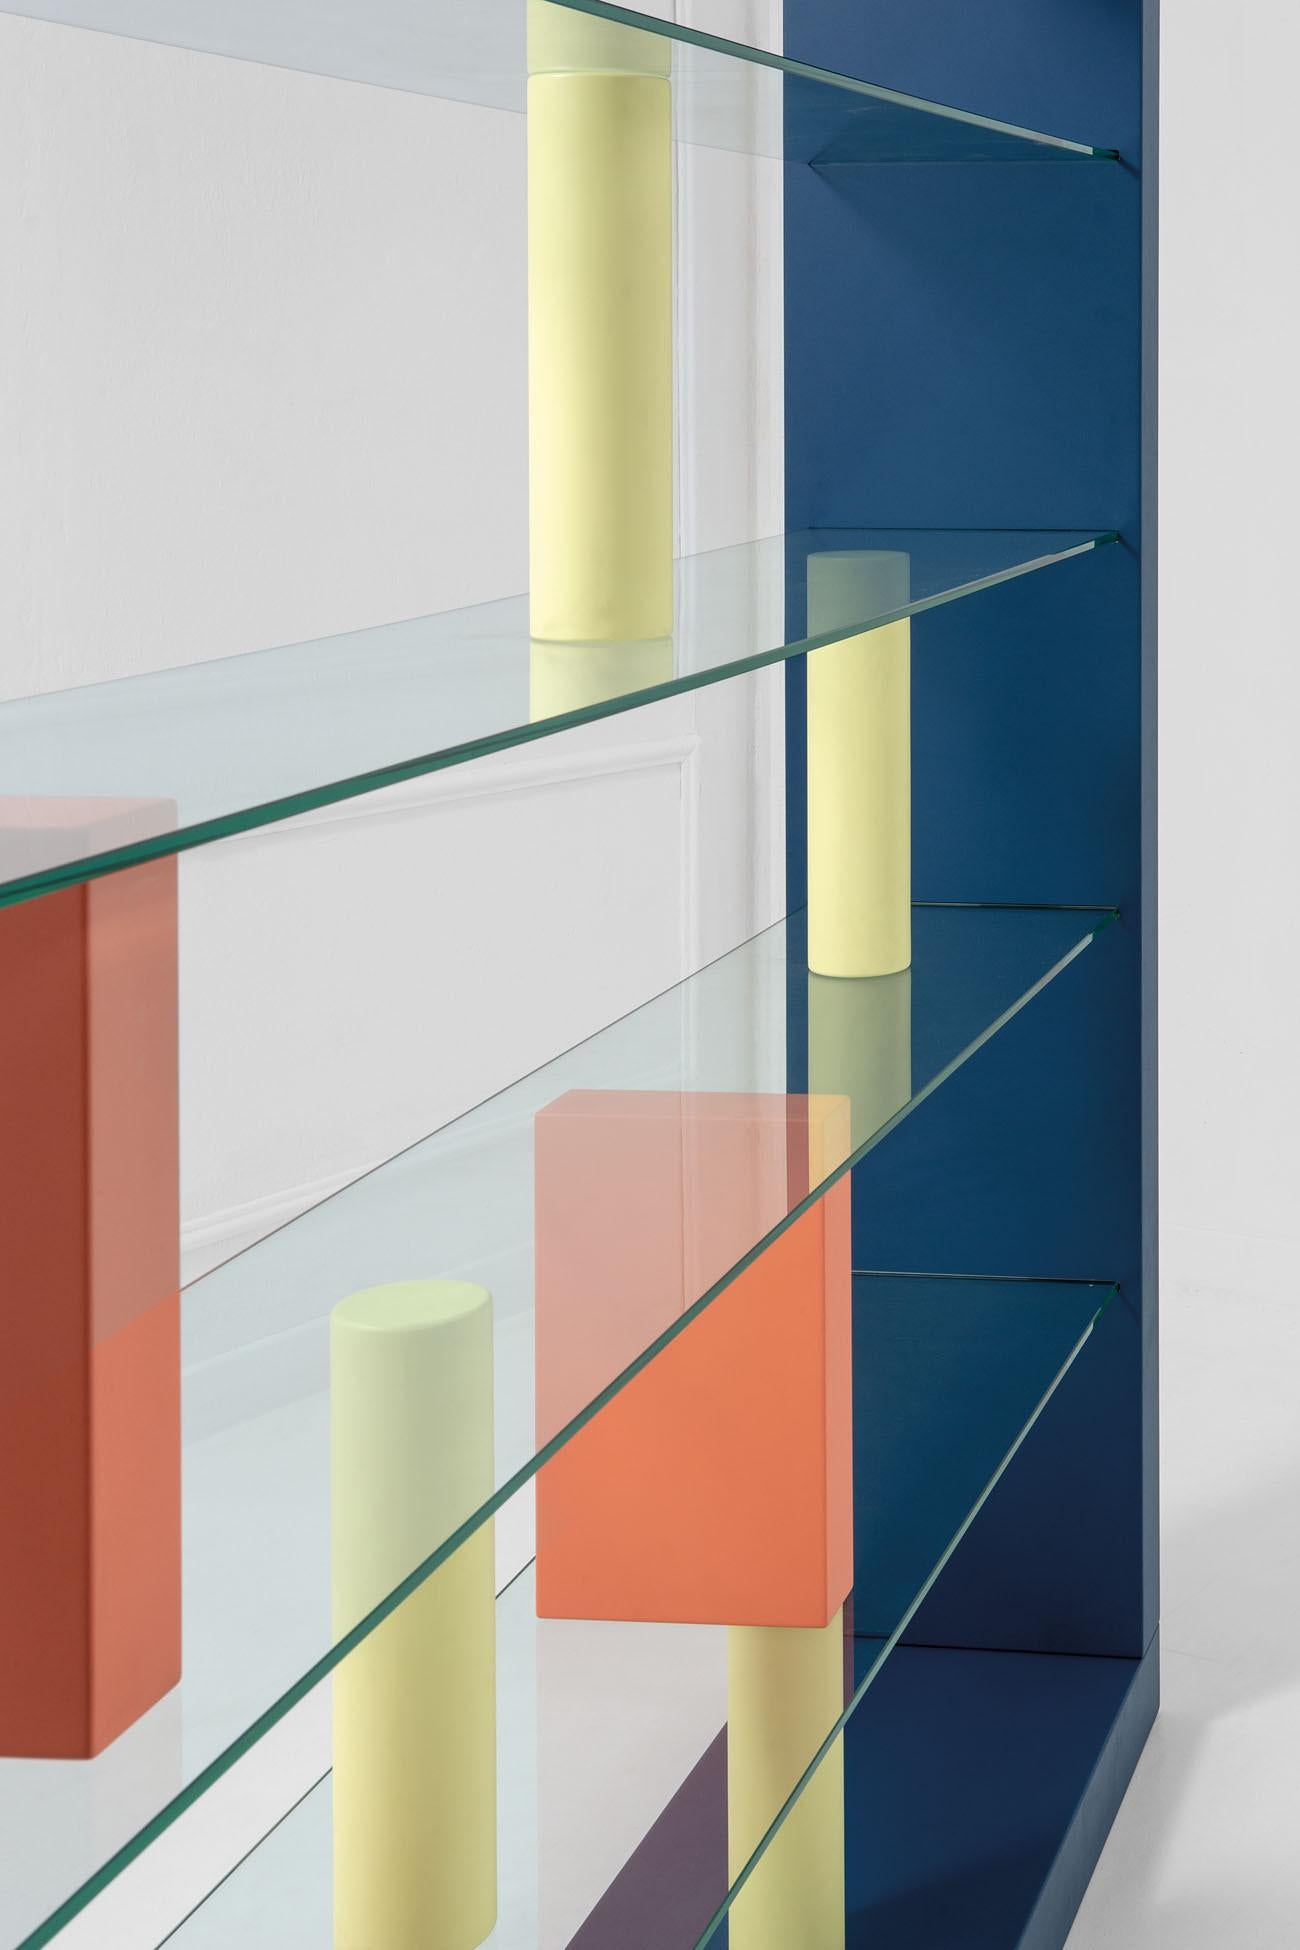 20th-century bookcase Giorno by Ettore Sottsass consisting of a rectangular structure in lacquered blue wood, crystal shelves, and lacquered orange and yellow wood supporting blocks in geometrical shapes.
Production Shopenauer (Fontana Arte),